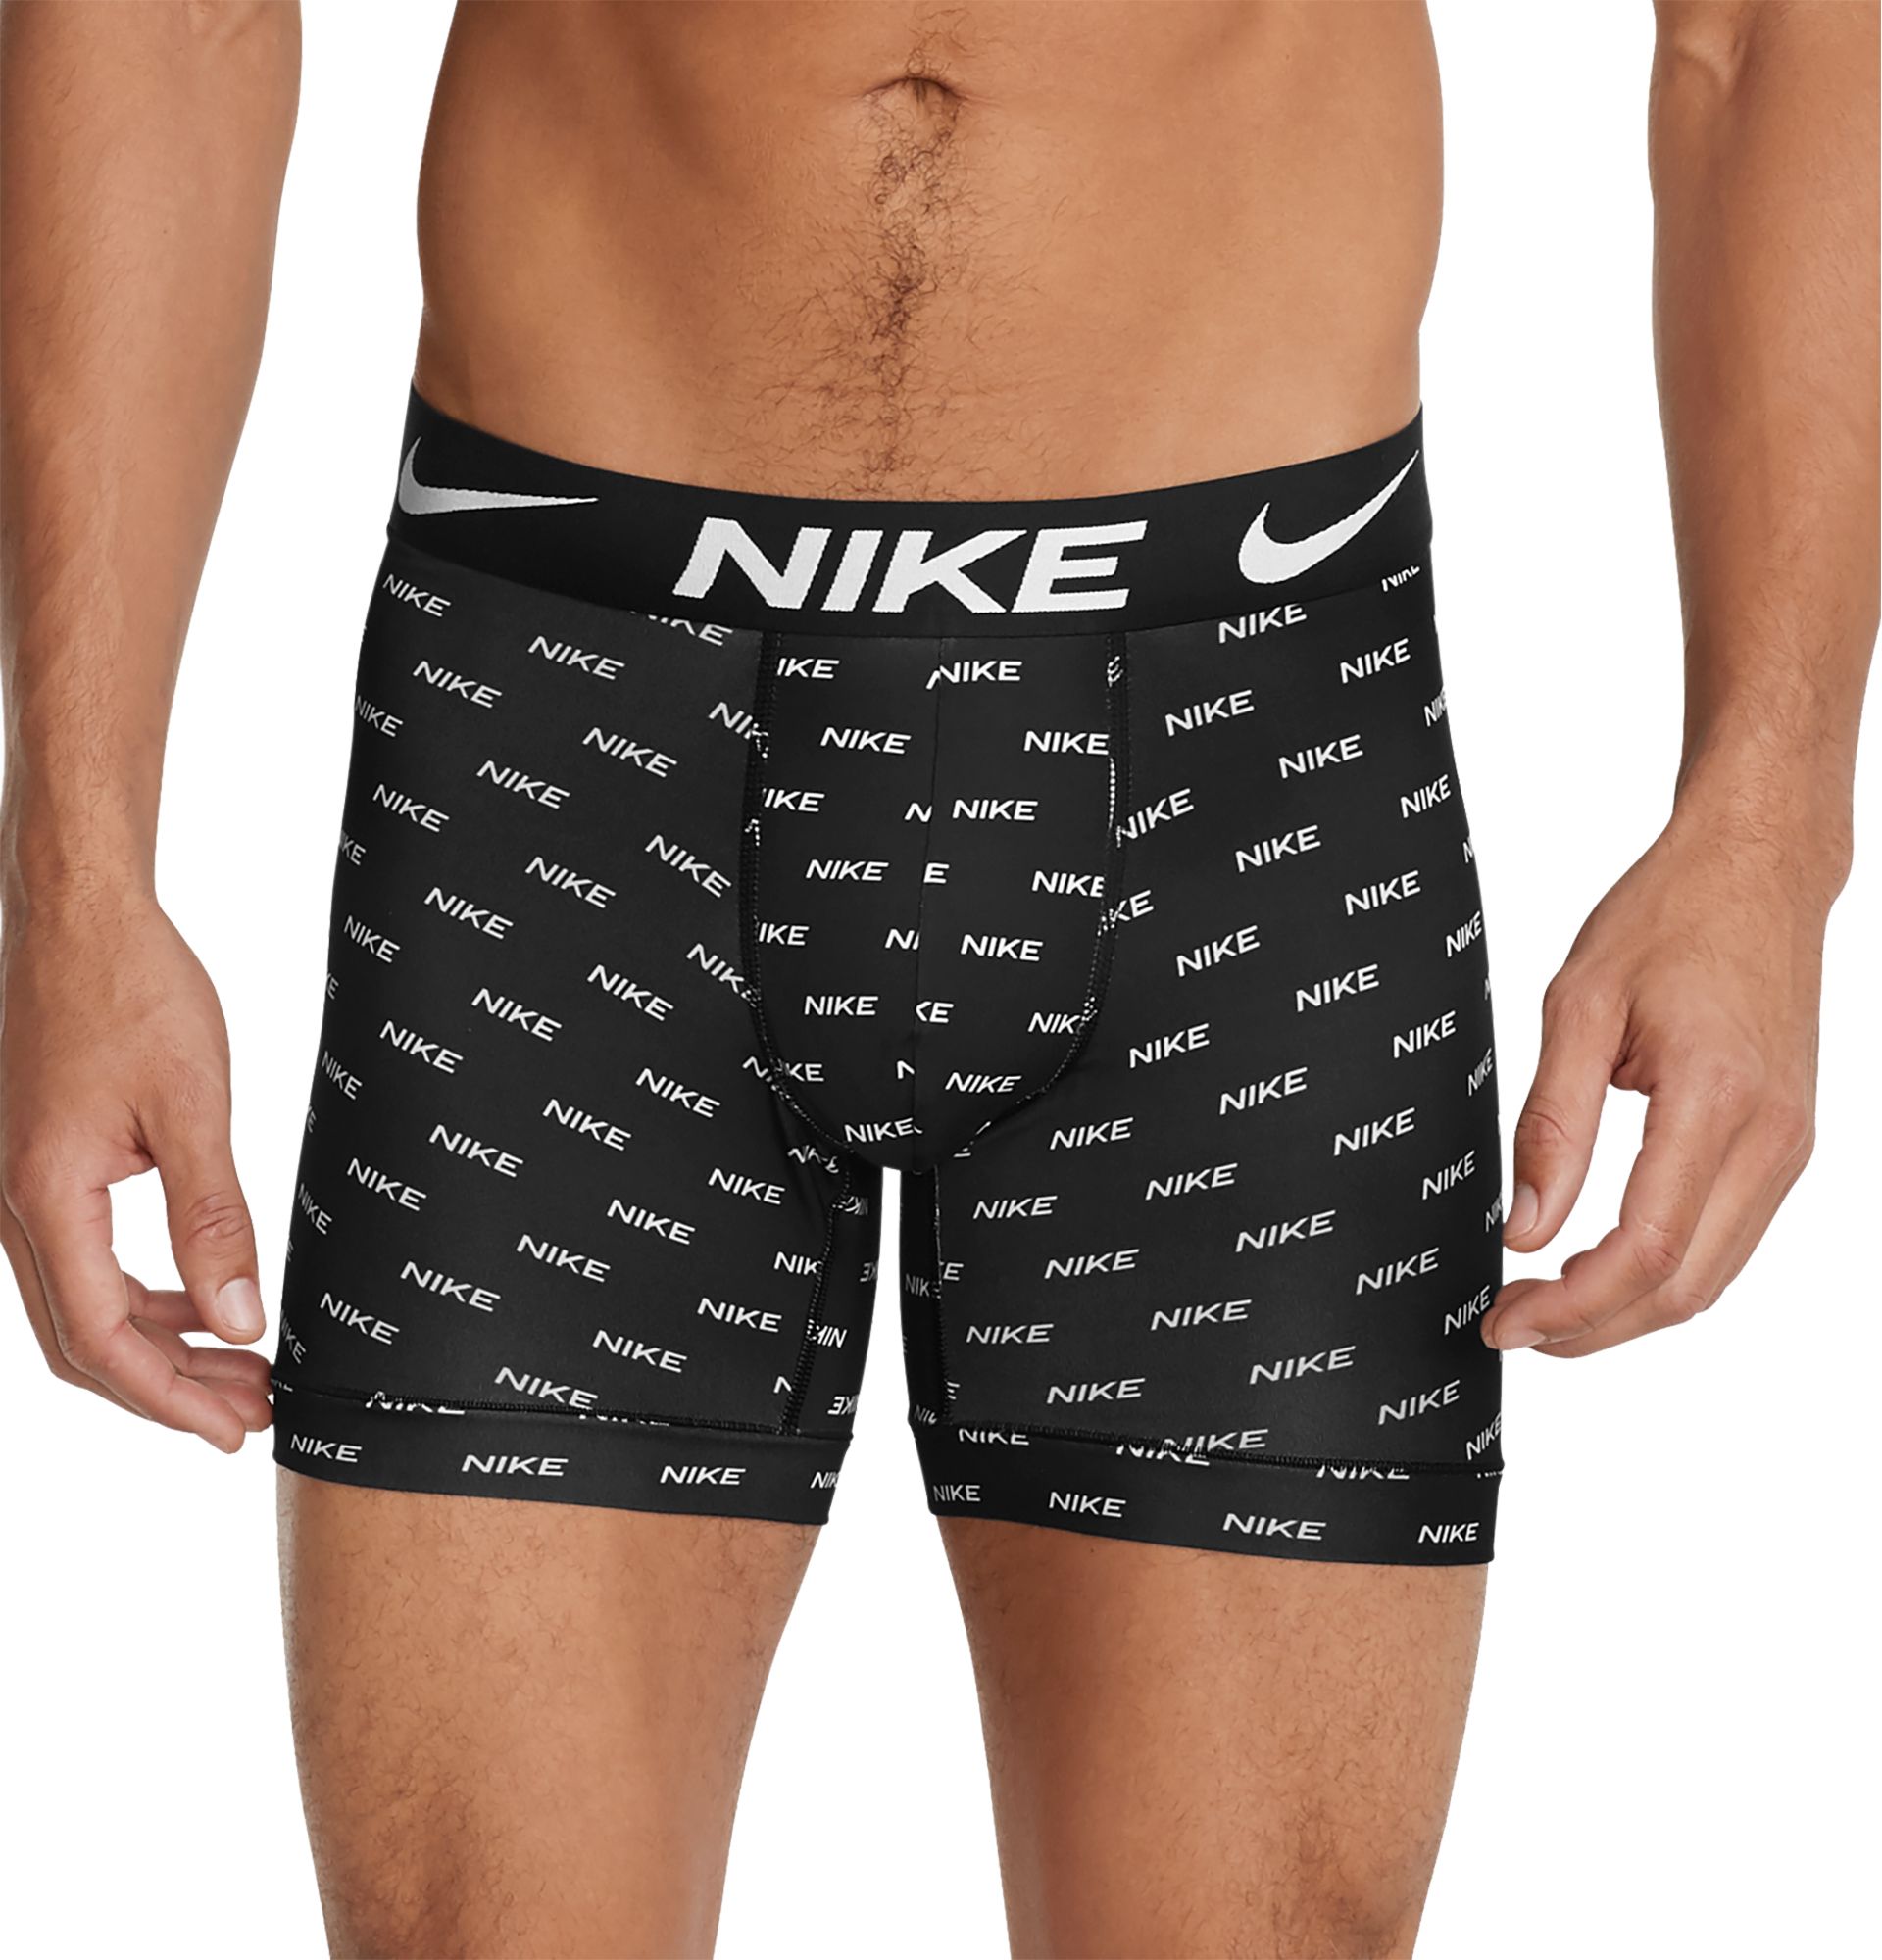 nike boxer briefs review